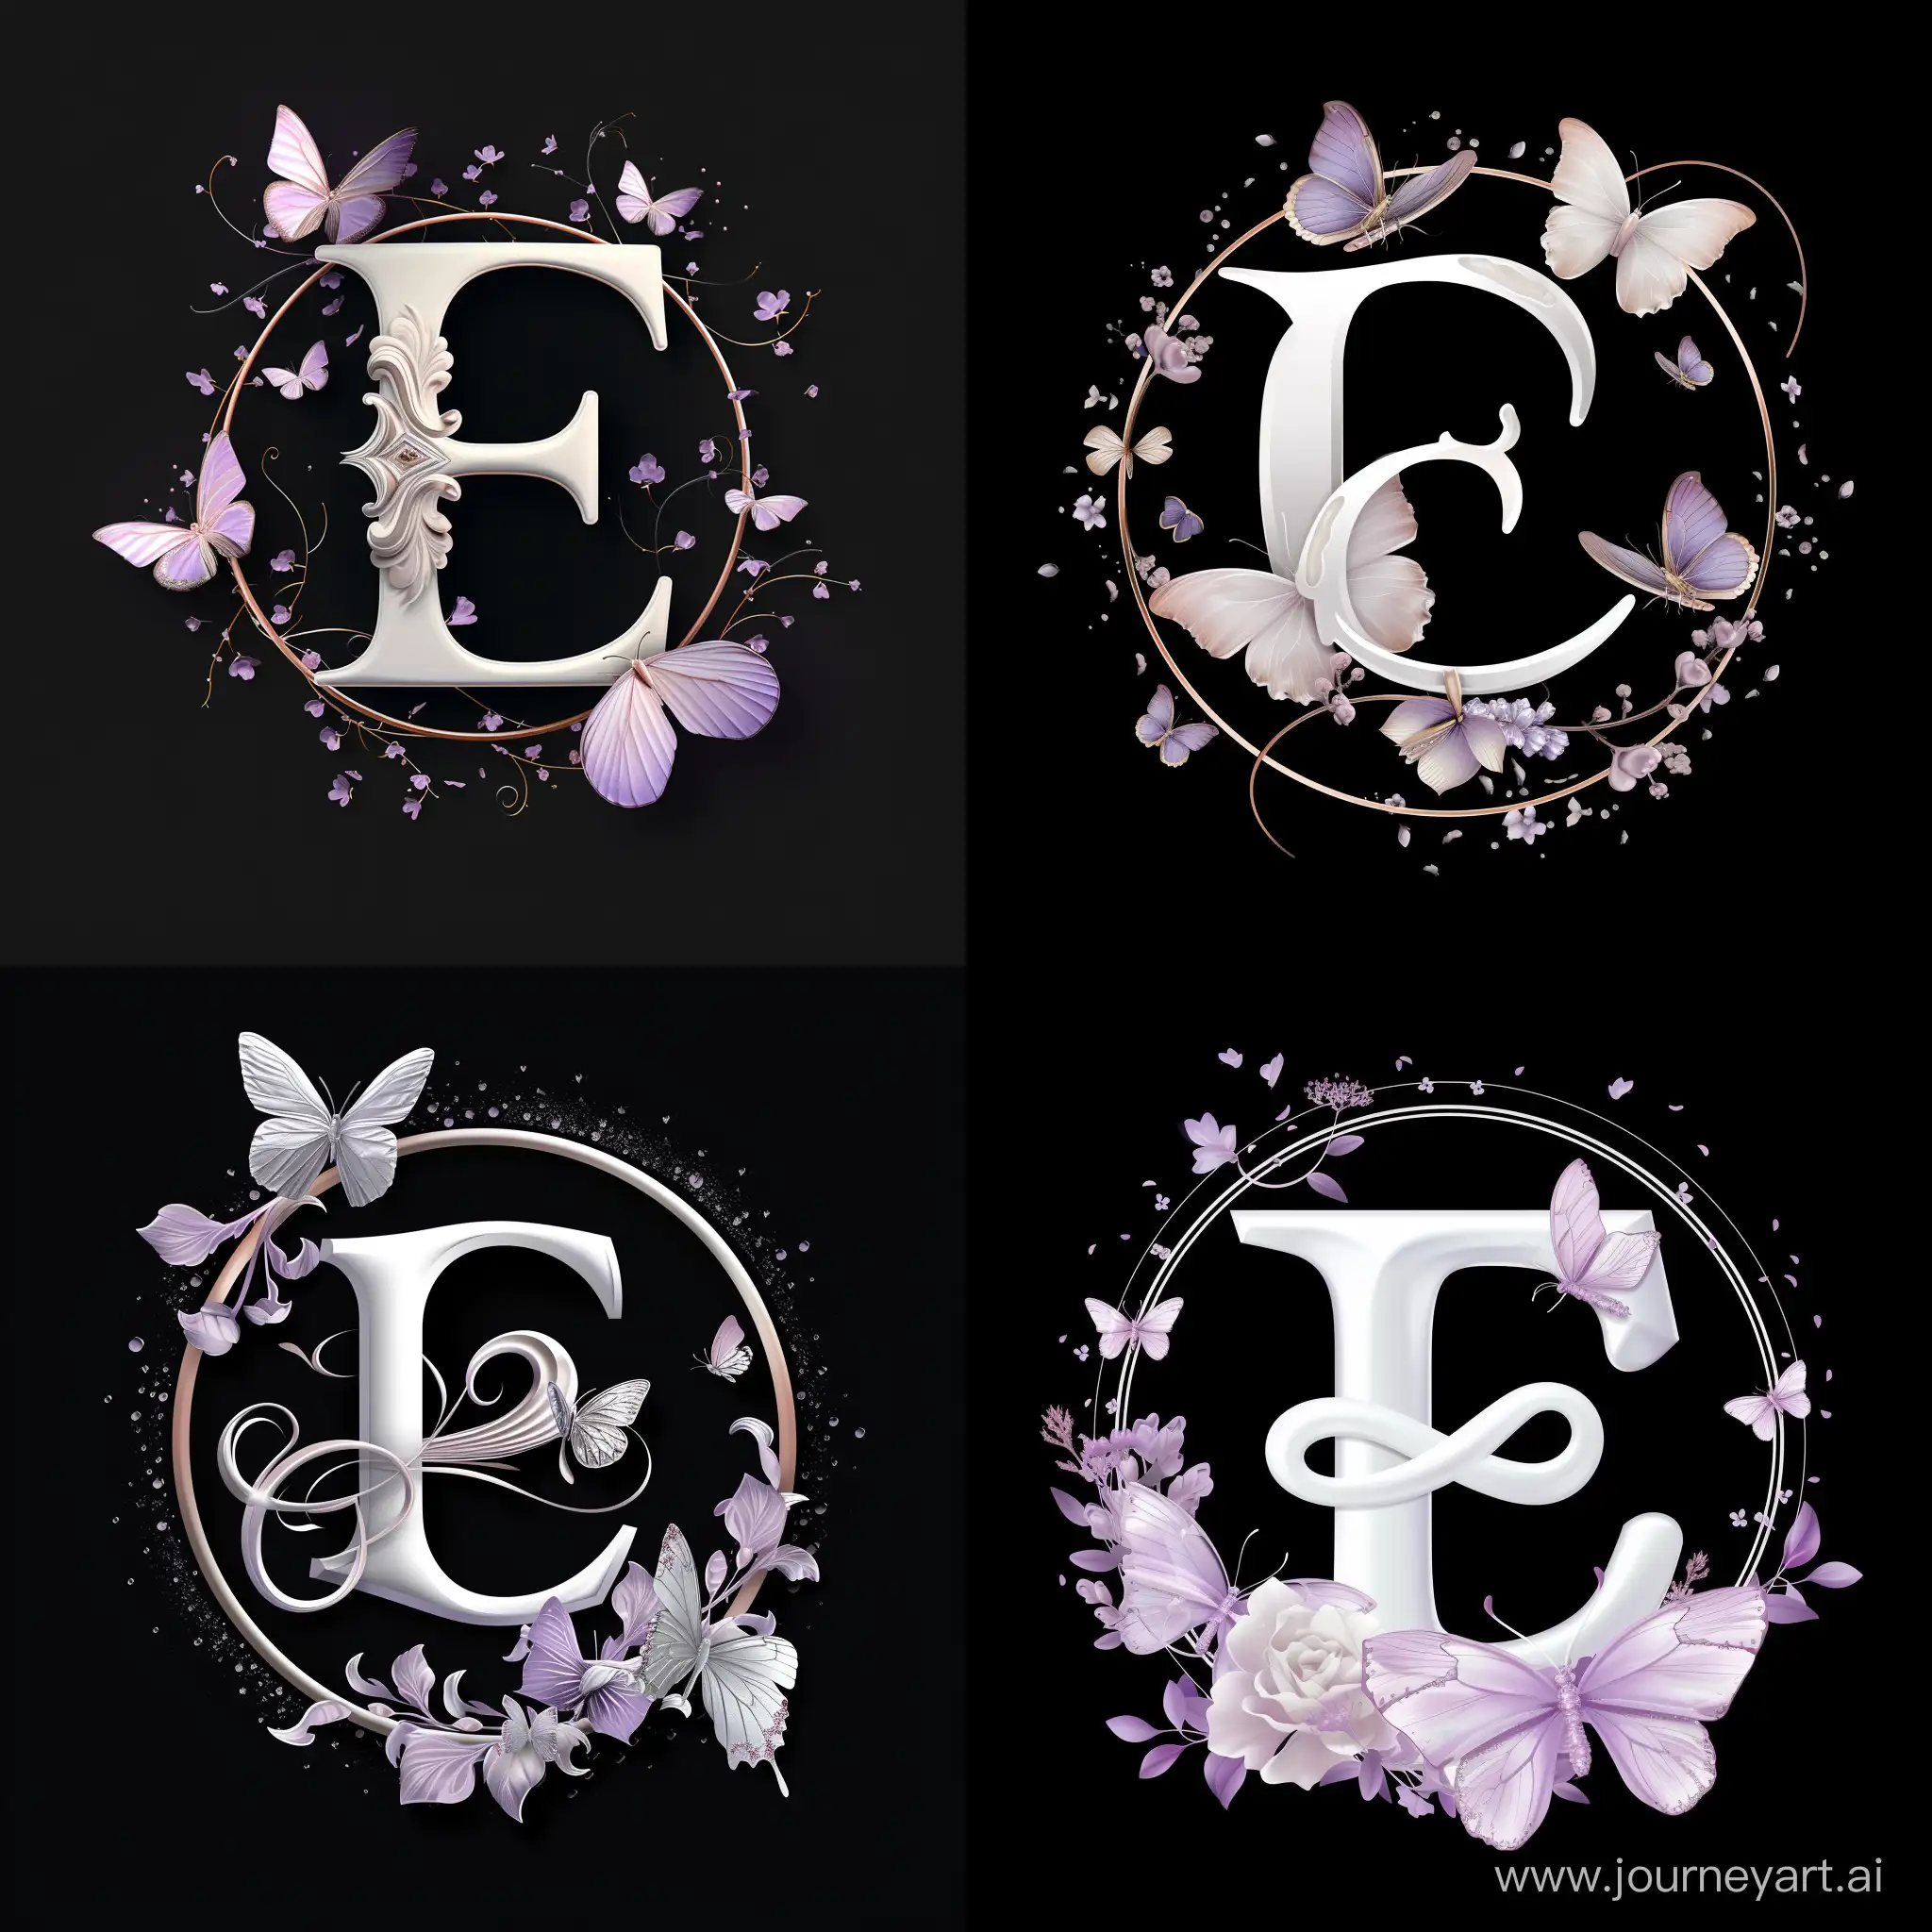 Make a realistic and fancy logo for a high prestige beauty business. Have a big fancy letter E in the middle thats color white with some lilac. Include some small realistic butterflies. Have it all in a circle. Make the background black.